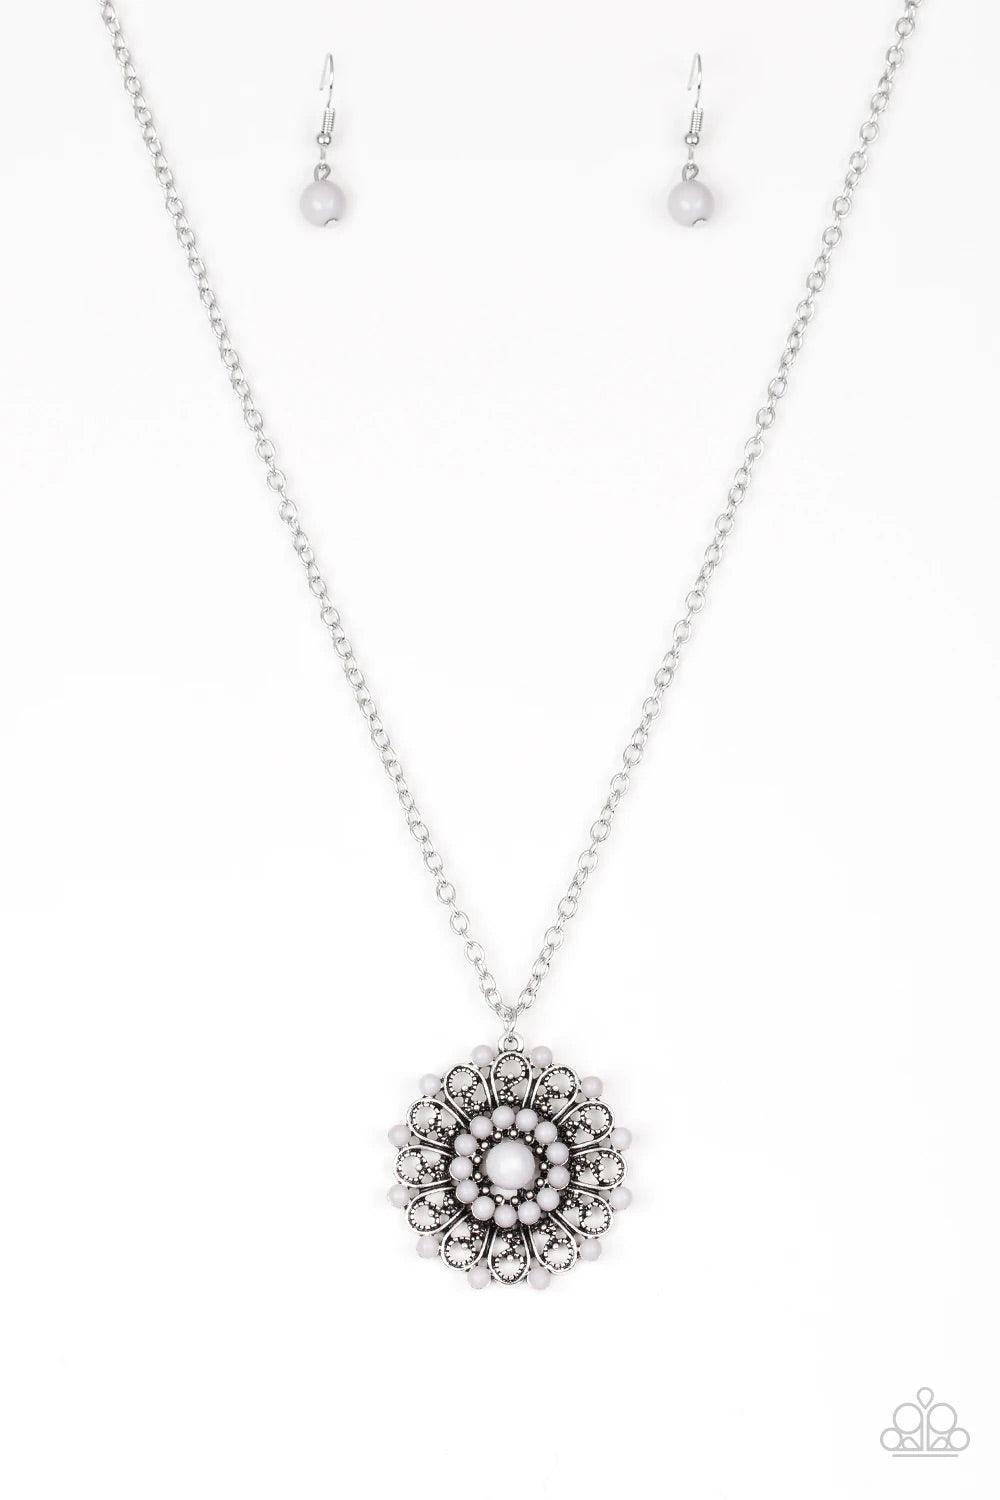 Paparazzi Accessories Boho Bonanza - Silver Neutral gray beads are sprinkled along ornate silver petals, creating a colorful floral frame. The whimsical pendant swings from the bottom of a lengthened silver chain for a seasonal look. Features an adjustabl